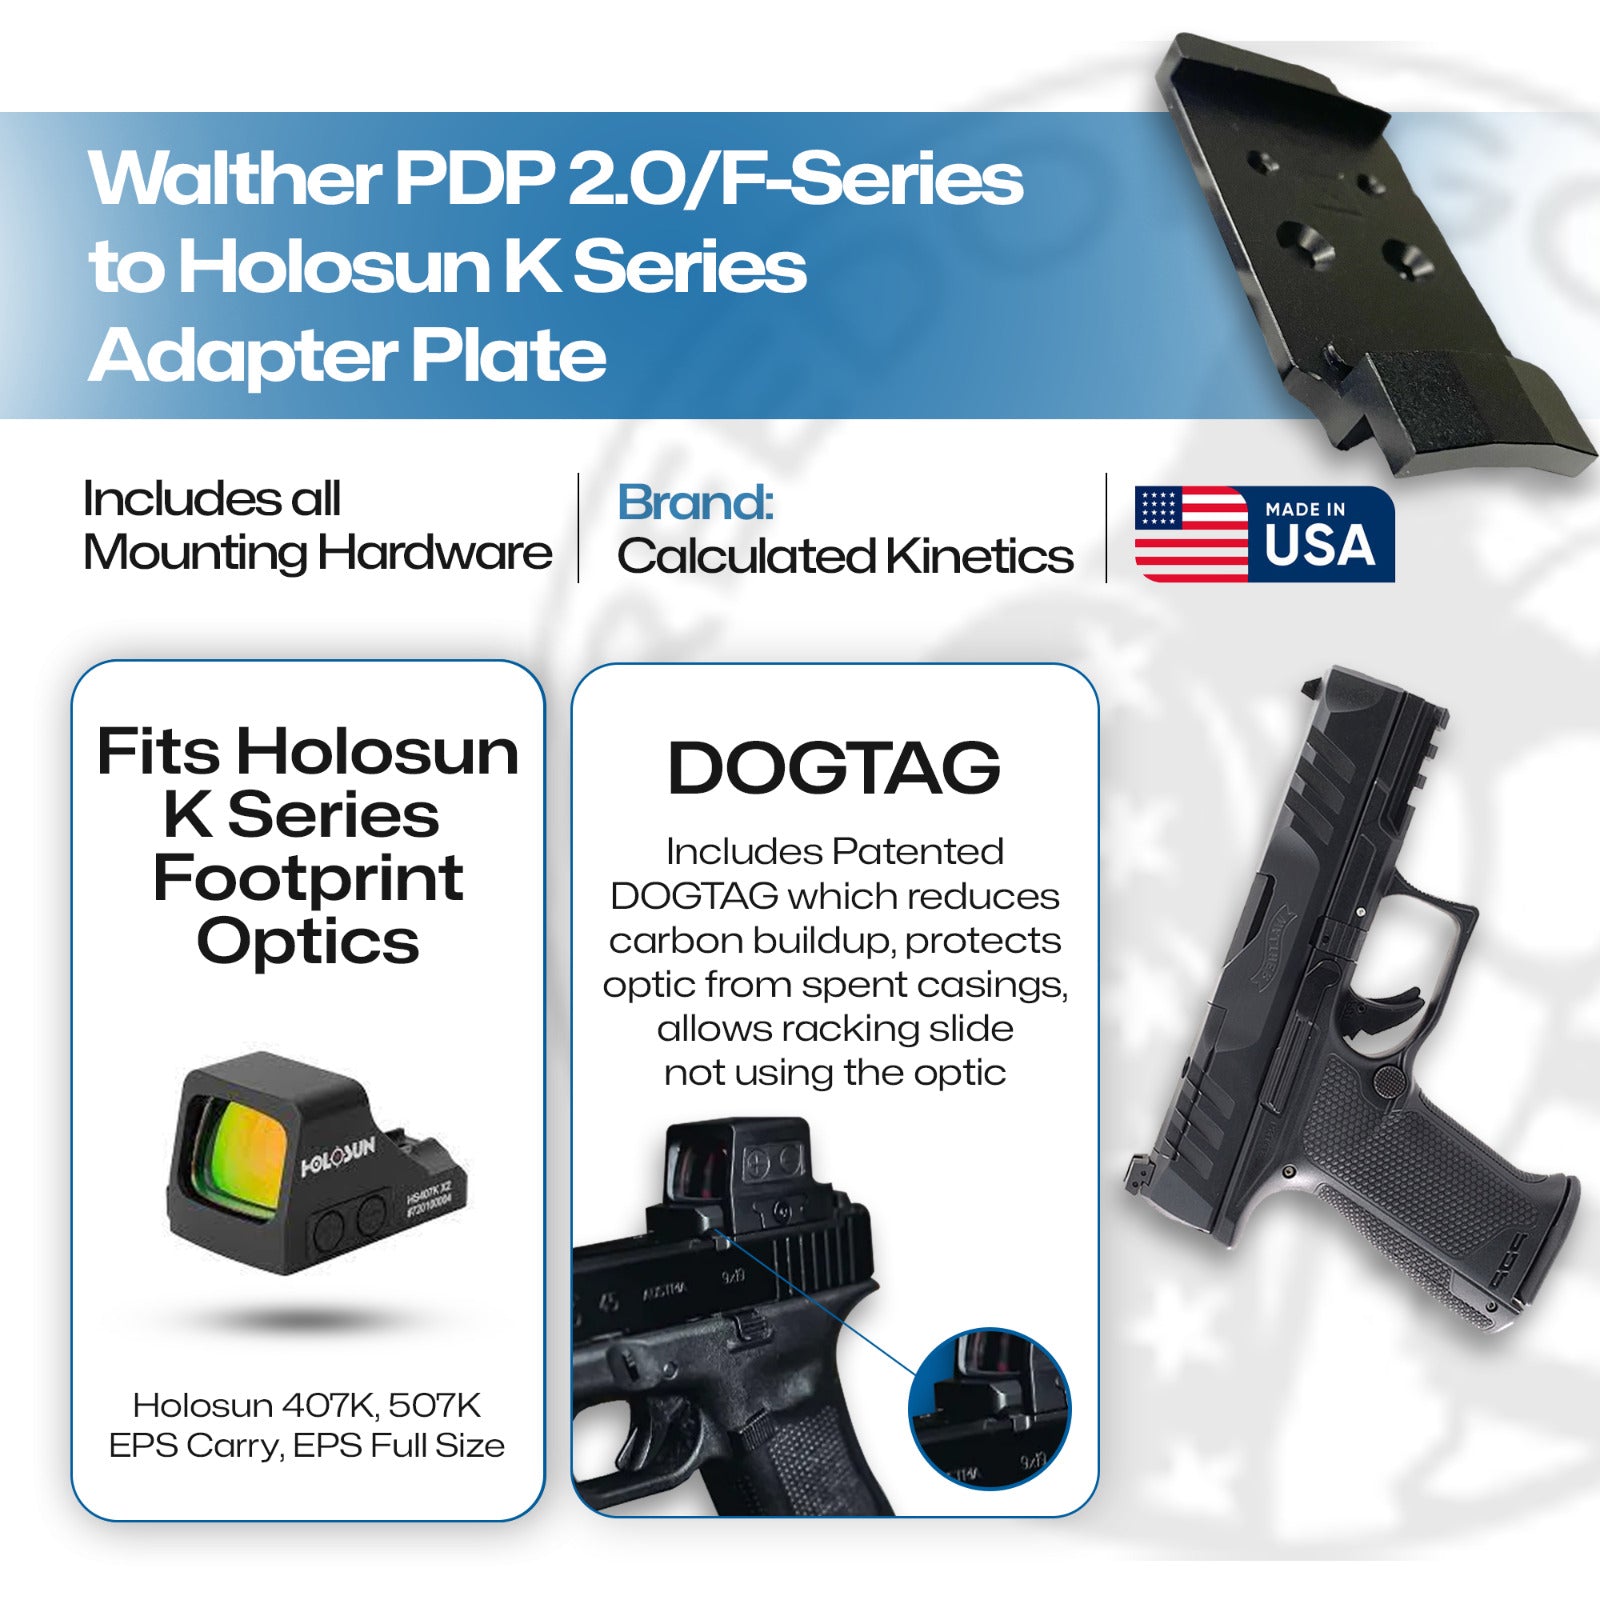 Walther PDP 2.0/F-Series Holosun 407K/507K/EPS/EPS Carry Adapter Plate - Aluminum - DOGTAG - Calculated Kinetics